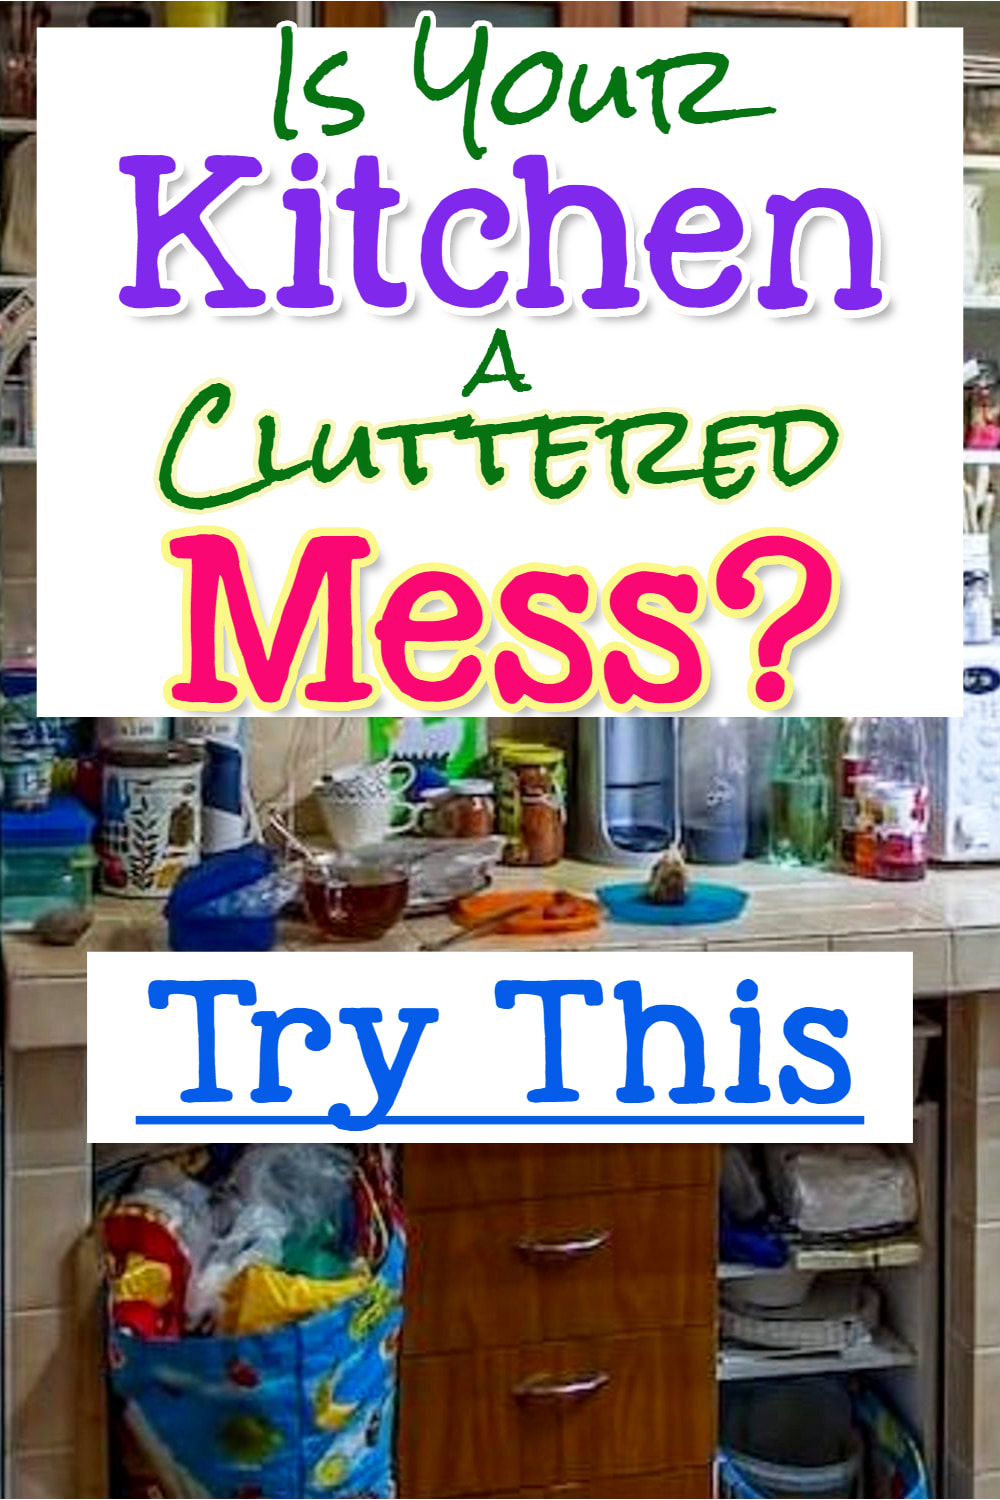 Cluttered house? Messy cluttered kitchen?  Try these kitchen decluttering ideas, cleaning hacks and cleaning checklists to declutter your kitchen FAST!  Don't know where to START organizing your cluttered kitchen?  Try these ideas for organizing clutter in your kitchen for clutter free countertops.  Uncluttering your kitchen without feeling overwhelmed has never been so easy with these home organization hacks for your kitchen from professional organizers.